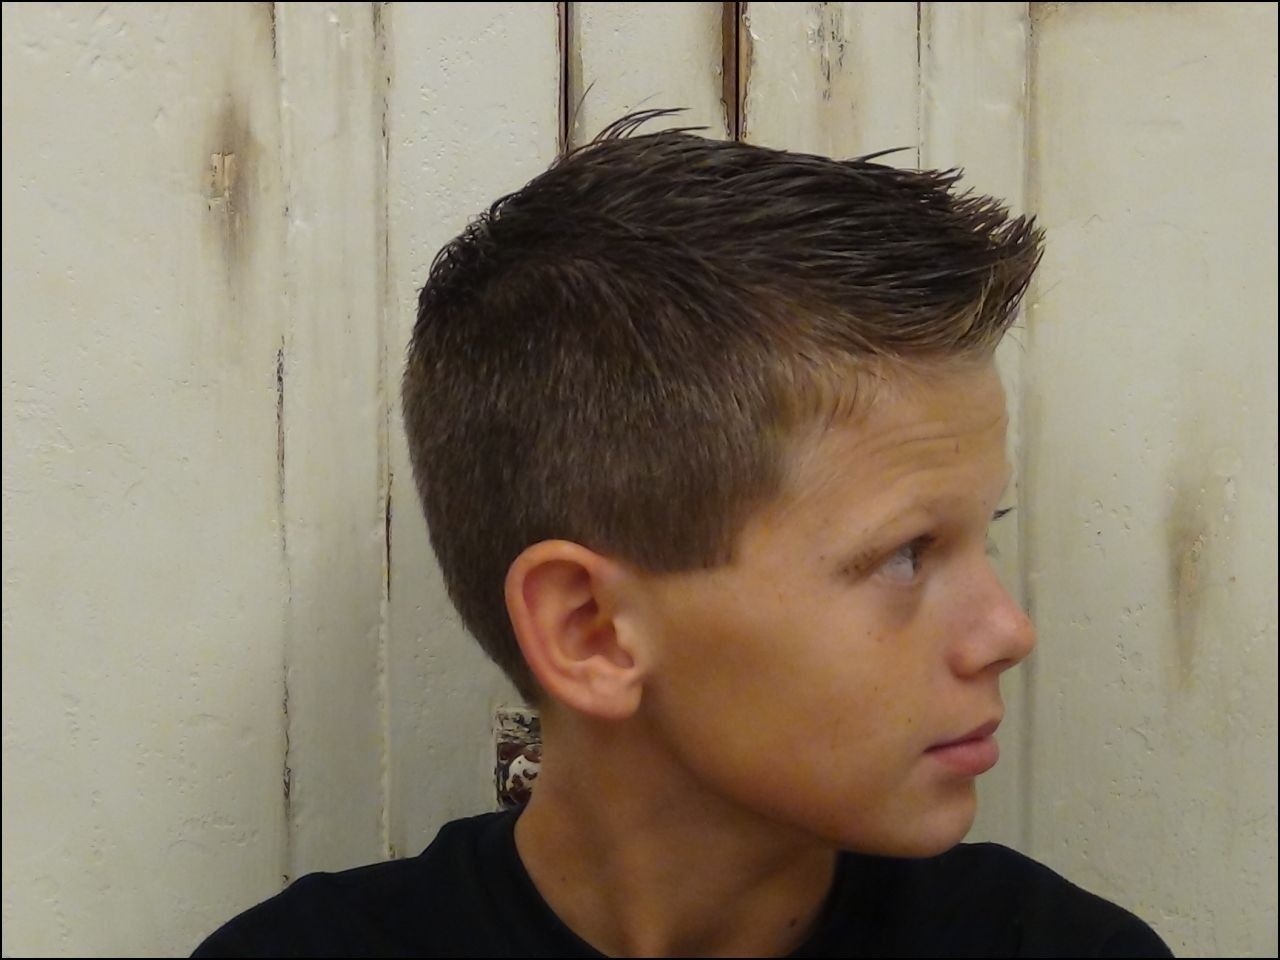 Pin On Boys Hair intended for 12 Years Old Hair Cut